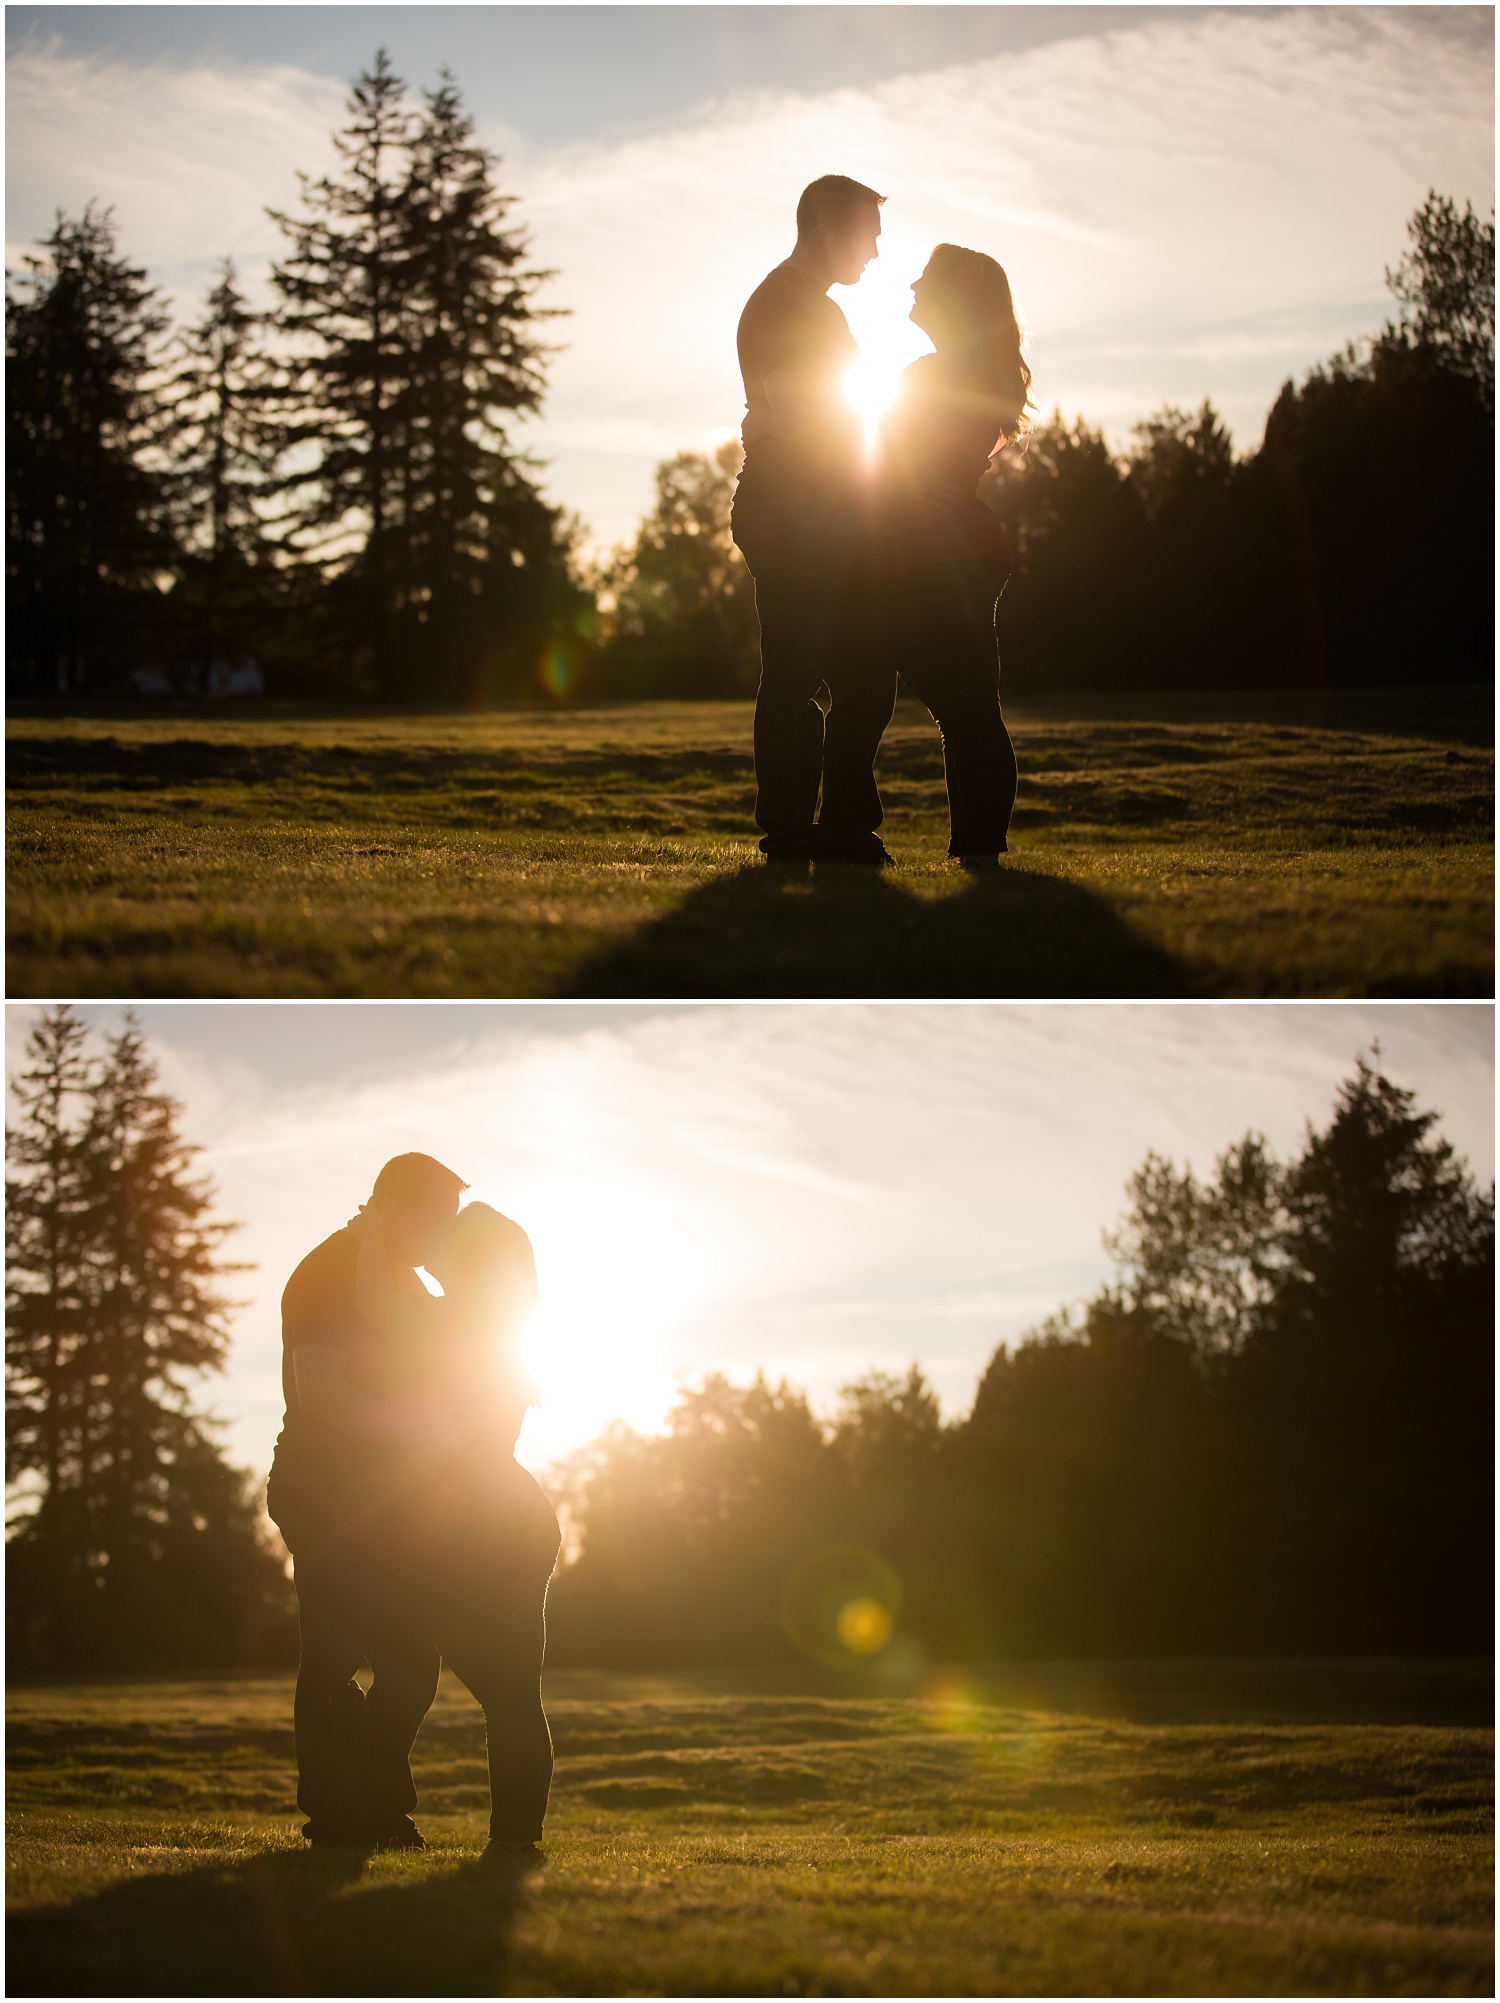 Amazing Day Photography - Langley Engagement Photographer - Compbell Valley Engagement Session (9).jpg